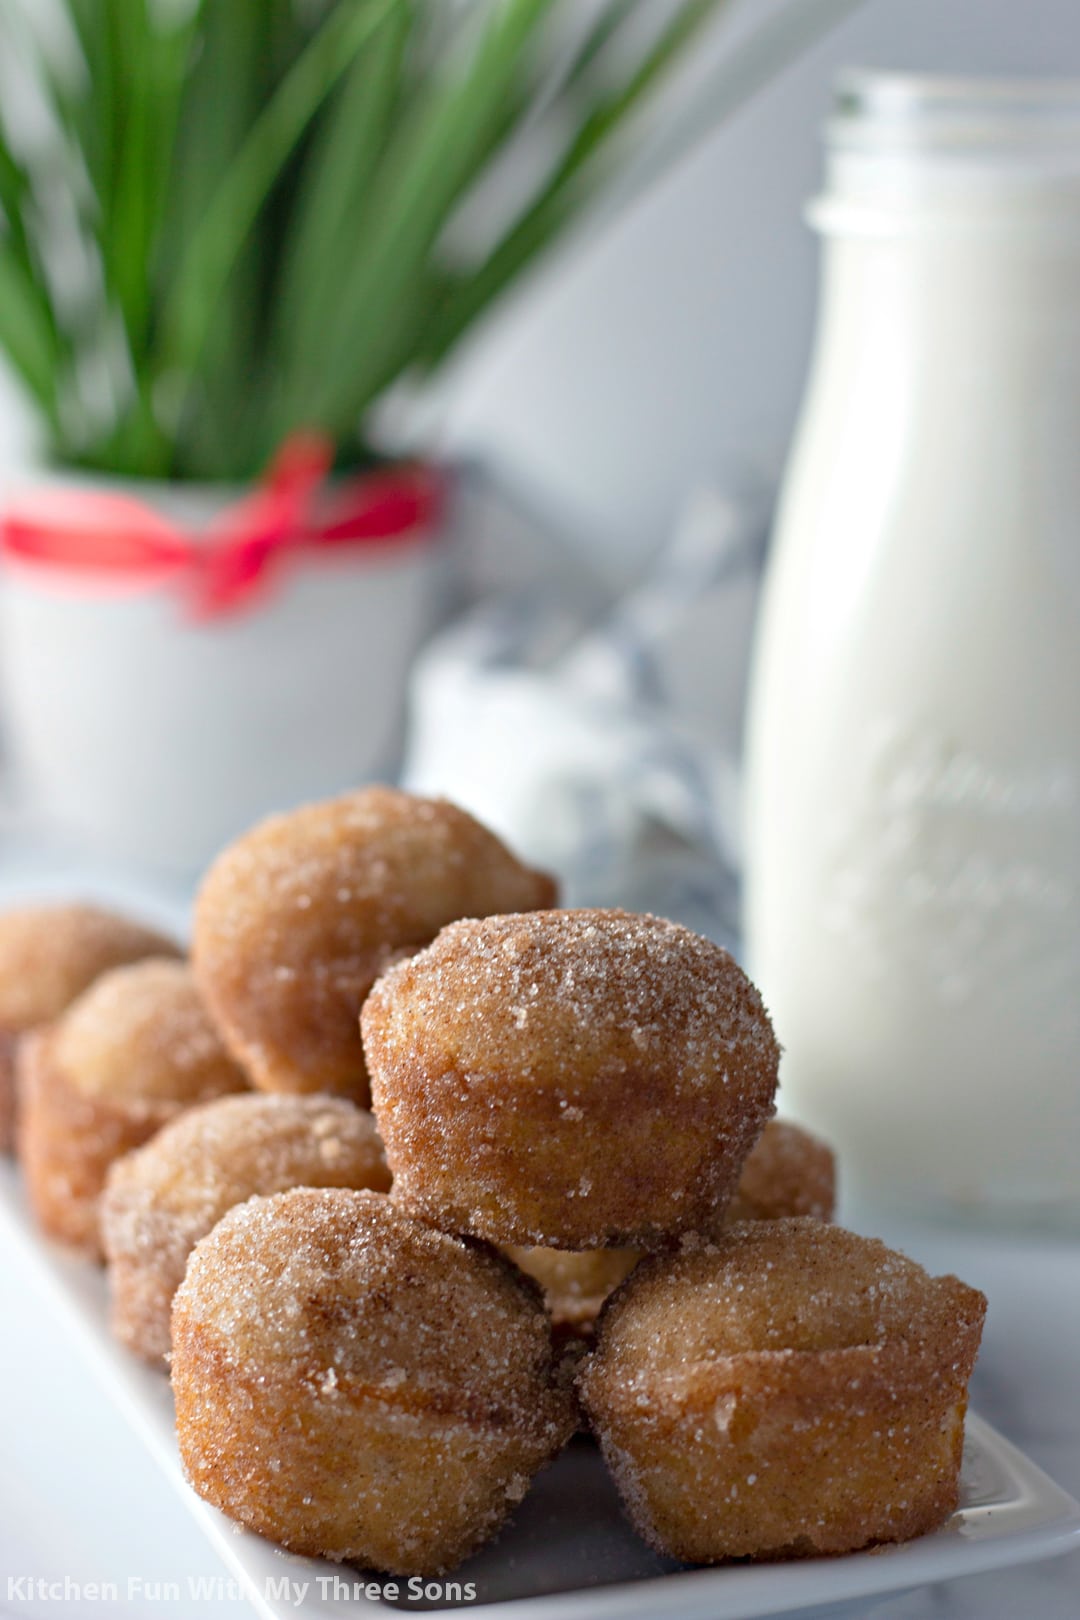 Cinnamon sugar muffins piled onto a plate with a glass of milk in the background